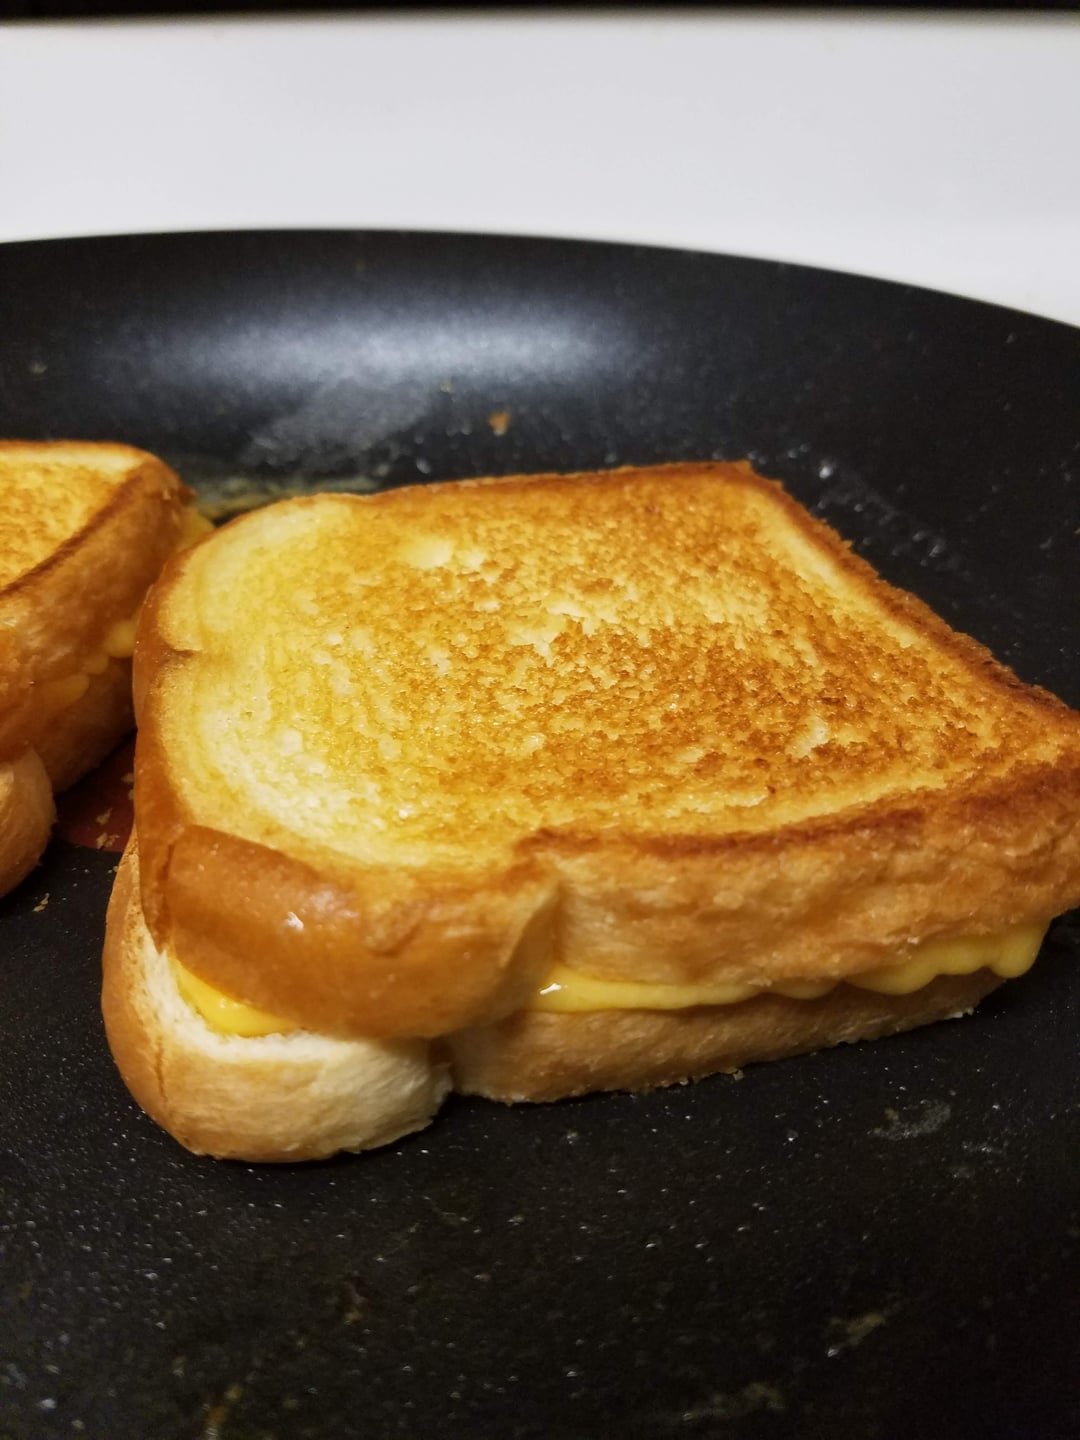 Here's an album of my grilled cheese in honor of national grilled